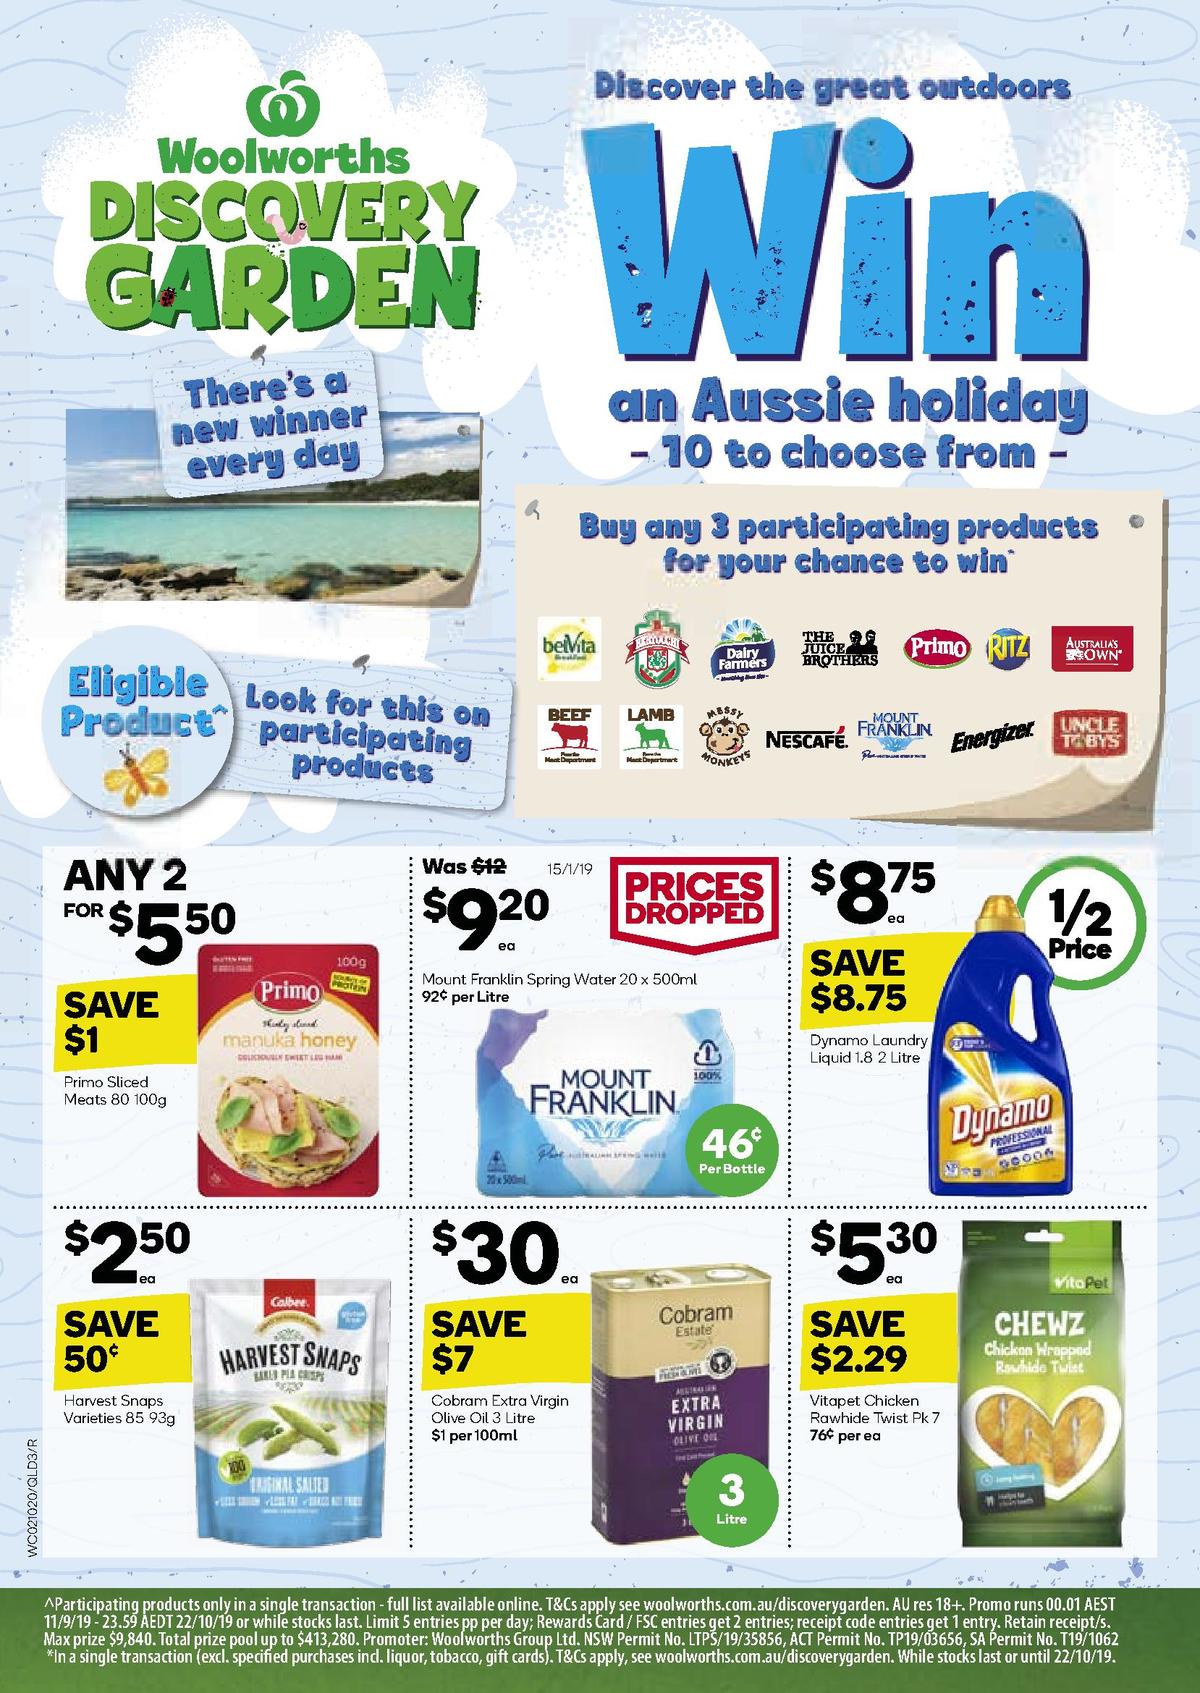 Woolworths Catalogues from 2 October